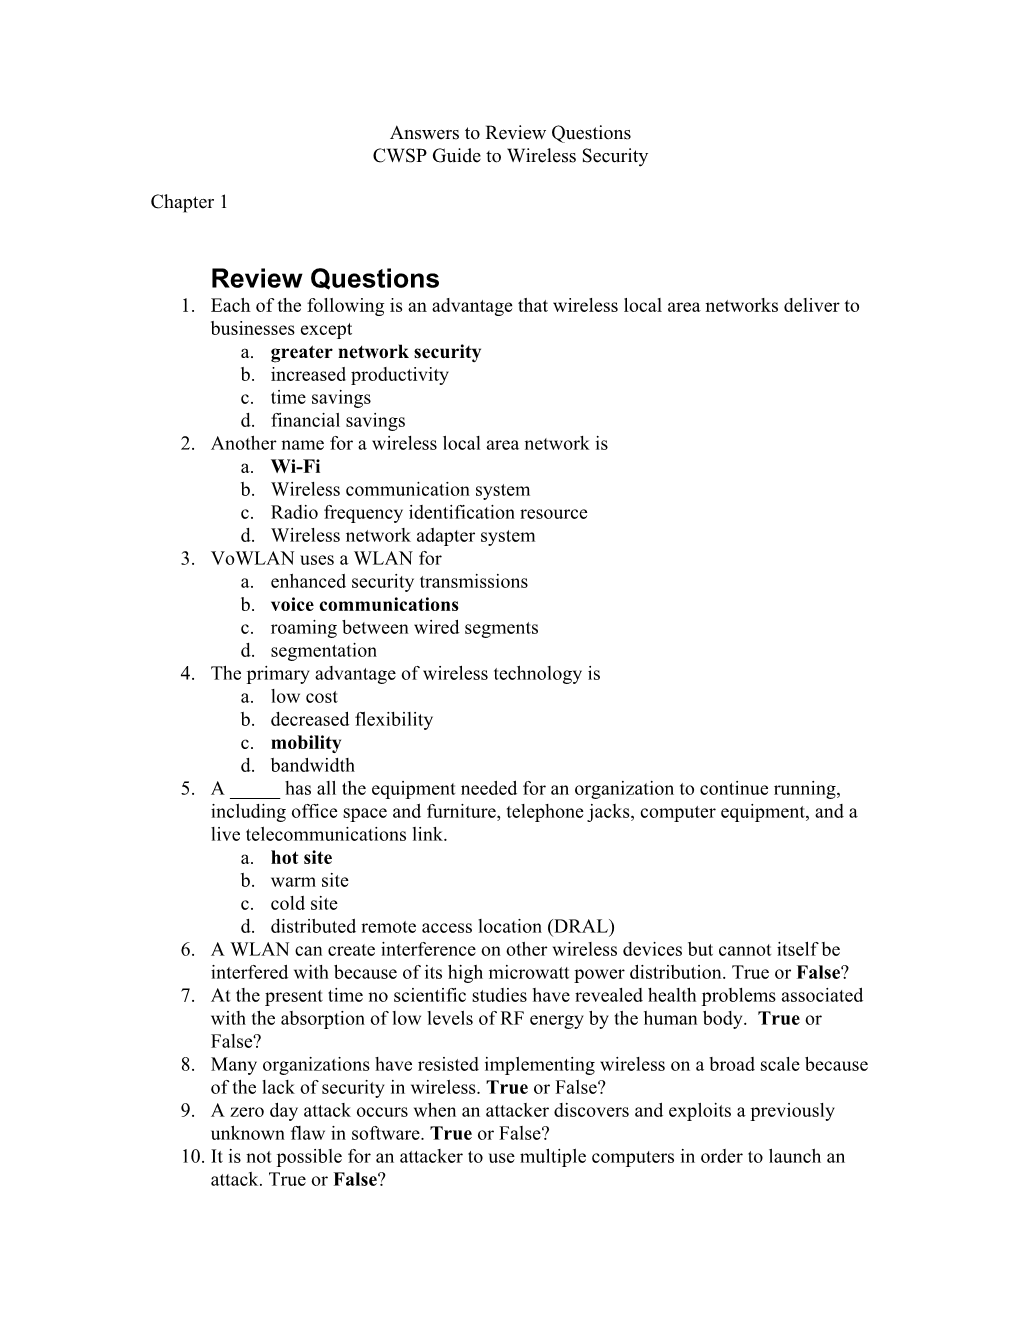 Answers to Review Questions CWSP Guide to Wireless Security